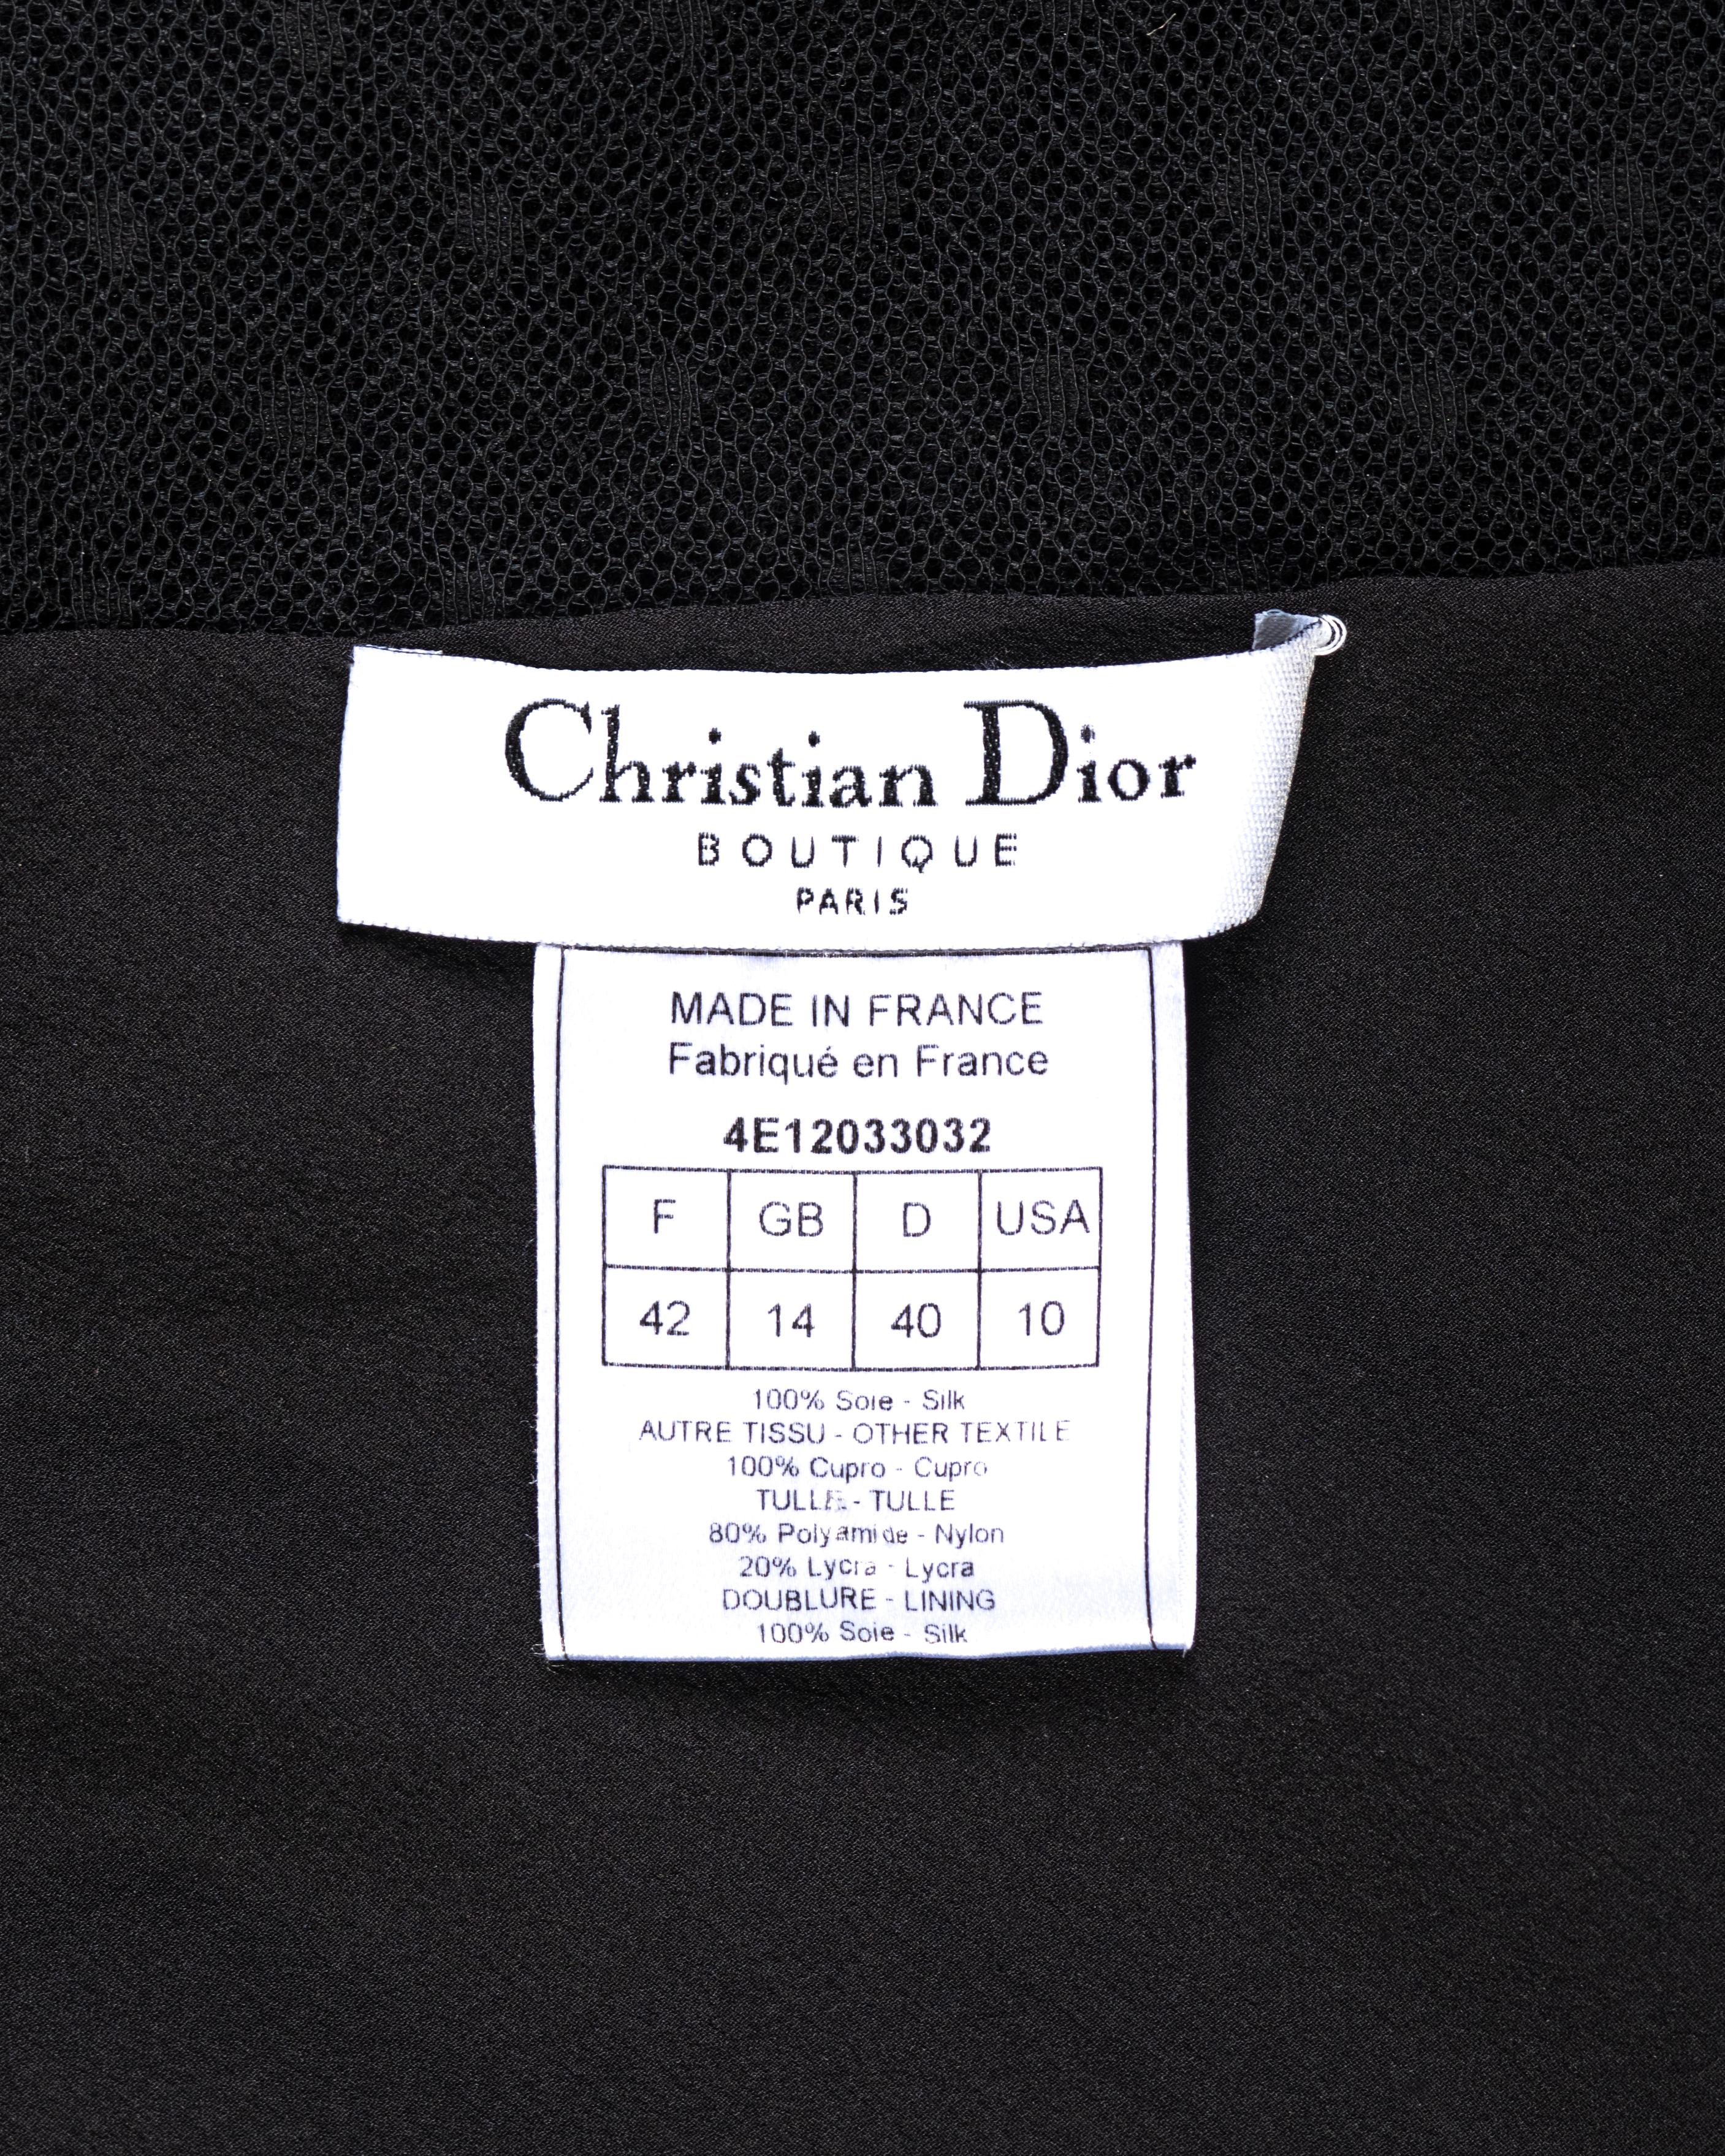 Christian Dior by John Galliano Black Strapless Silk and Mesh Dress, ss 2004 For Sale 9